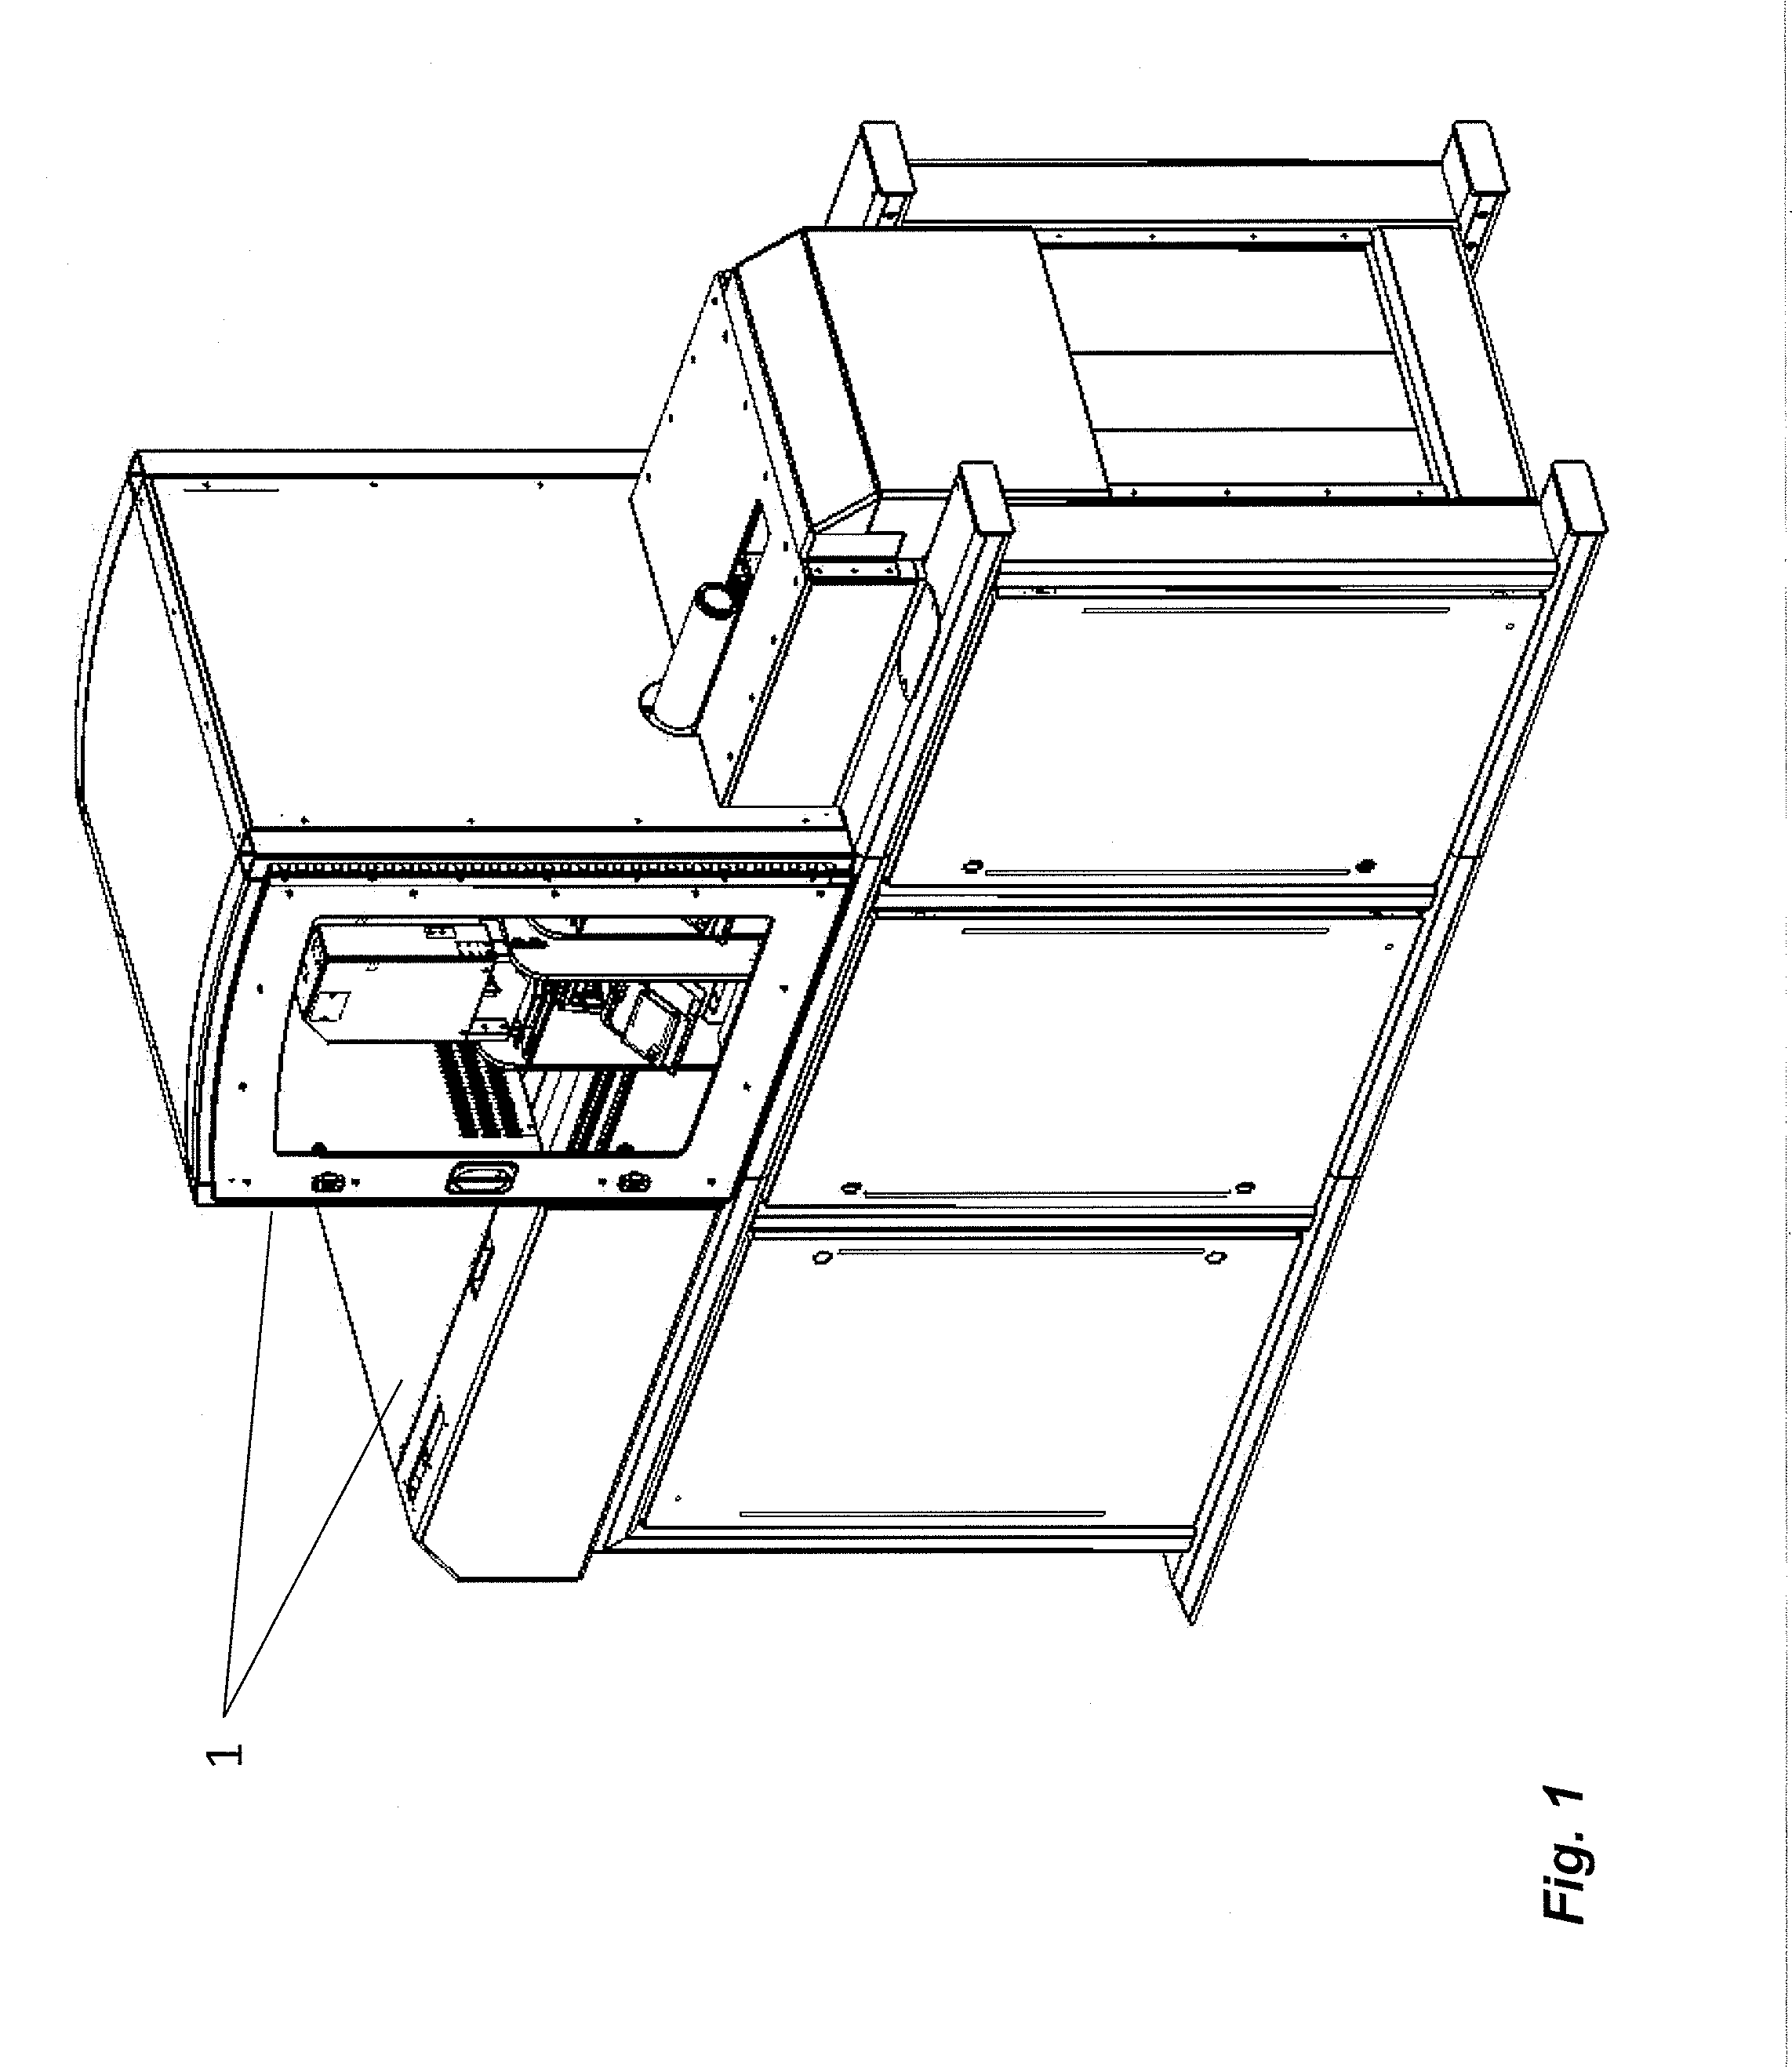 Apparatuses for Printing on Generally Cylindrical Objects and Related Methods